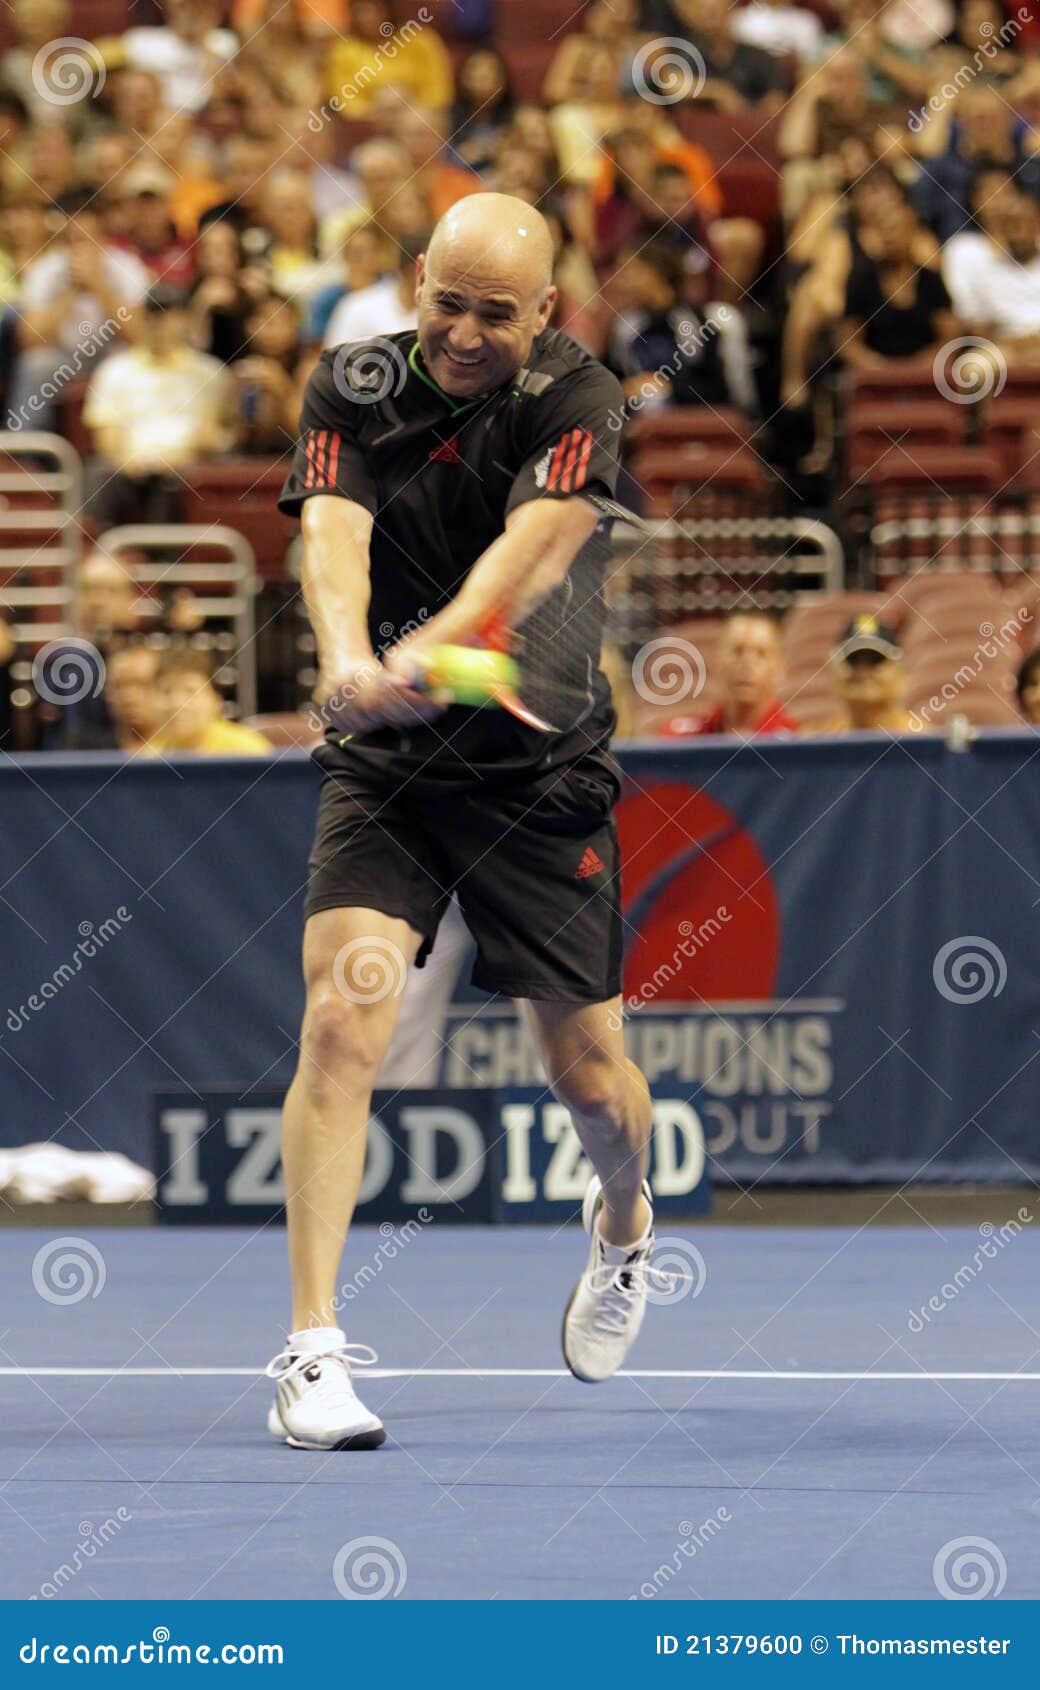 Andre Agassi - Tennis Legends on the Court 2011 Editorial Image - Image